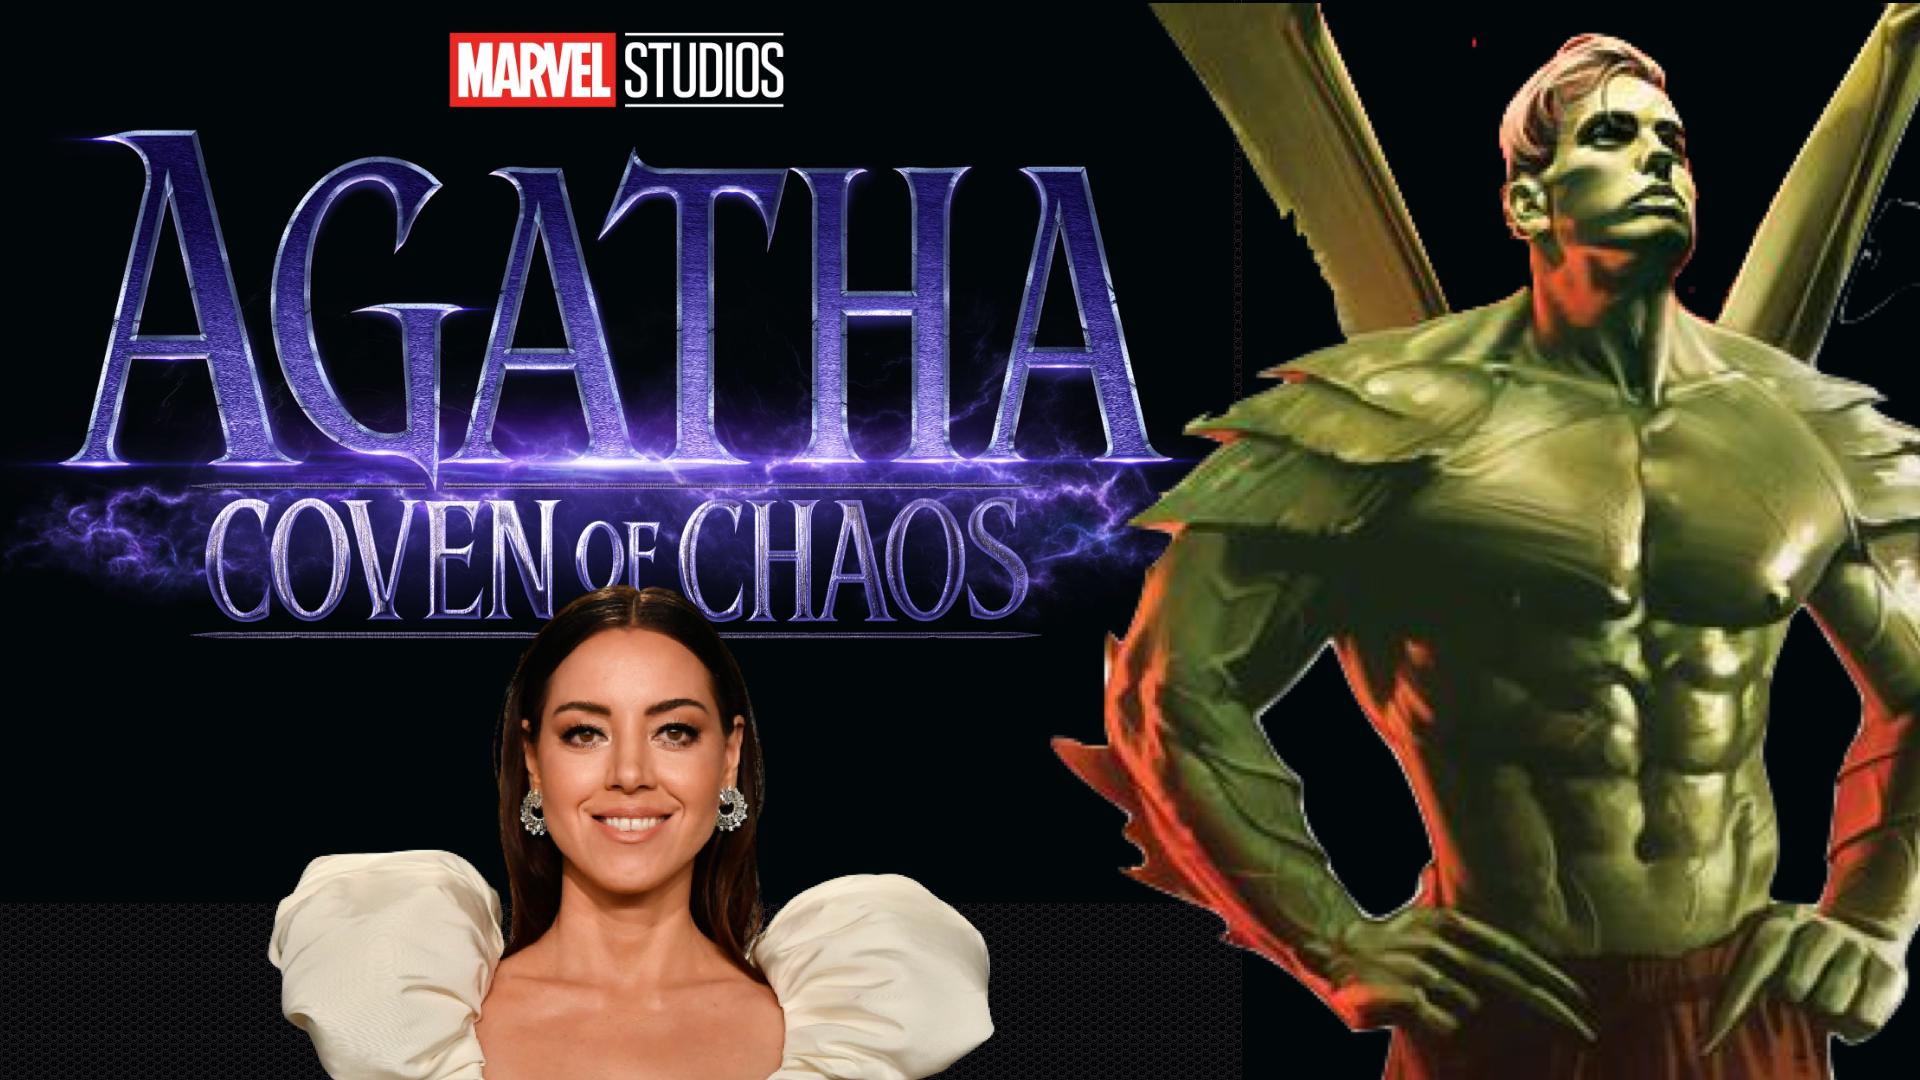 New Character Details For ‘Agatha: Coven of Chaos’ Revealed